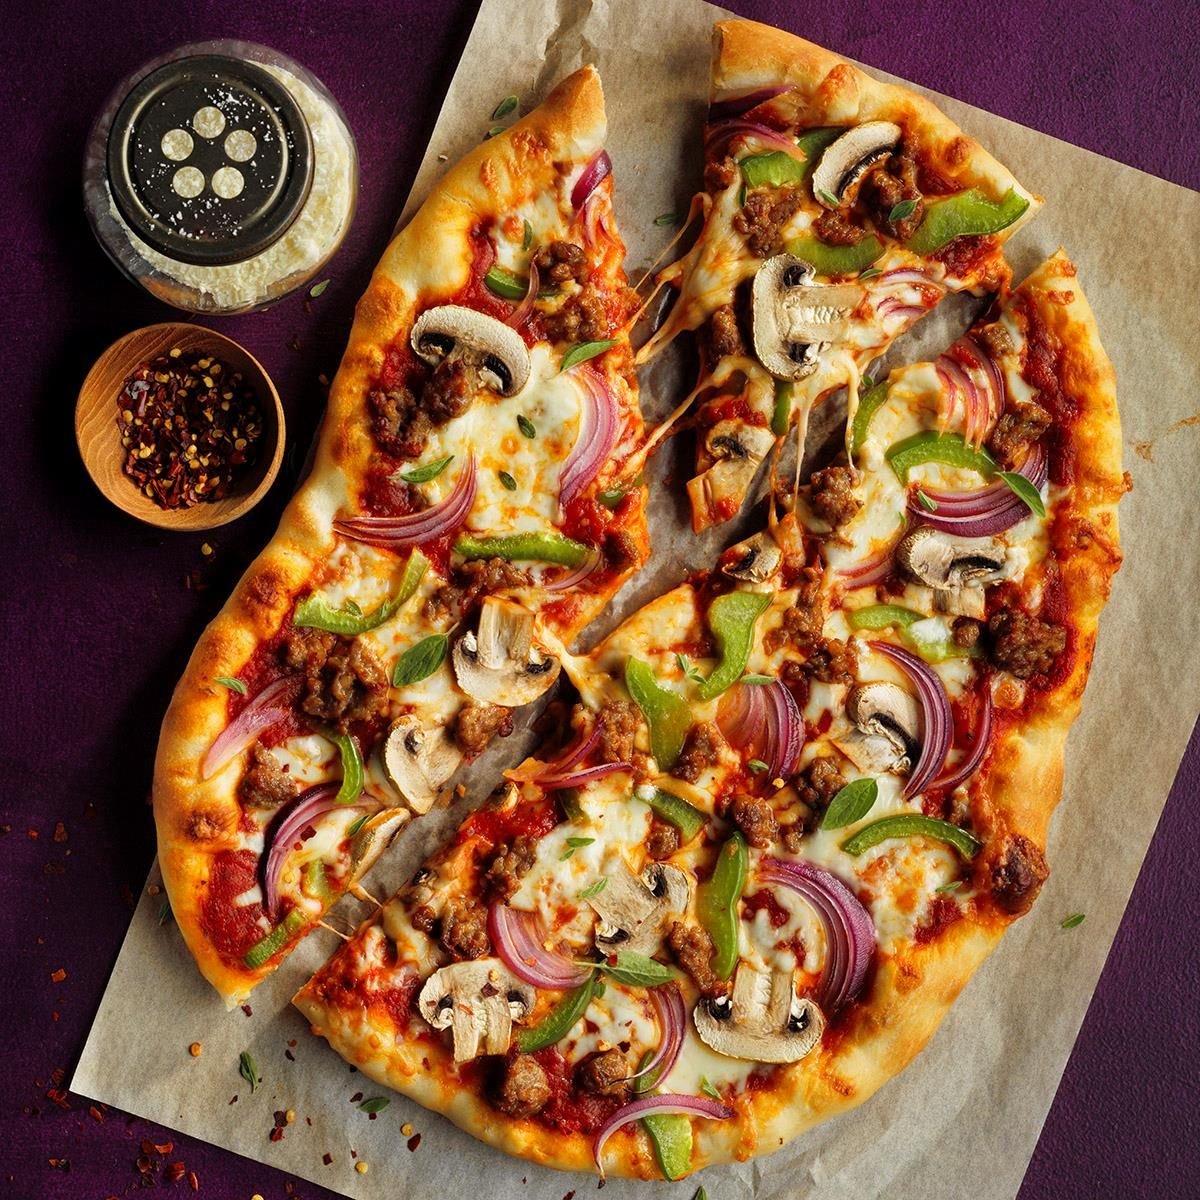 Our 10 Best Pizza Recipes for When You Want More Than Delivery